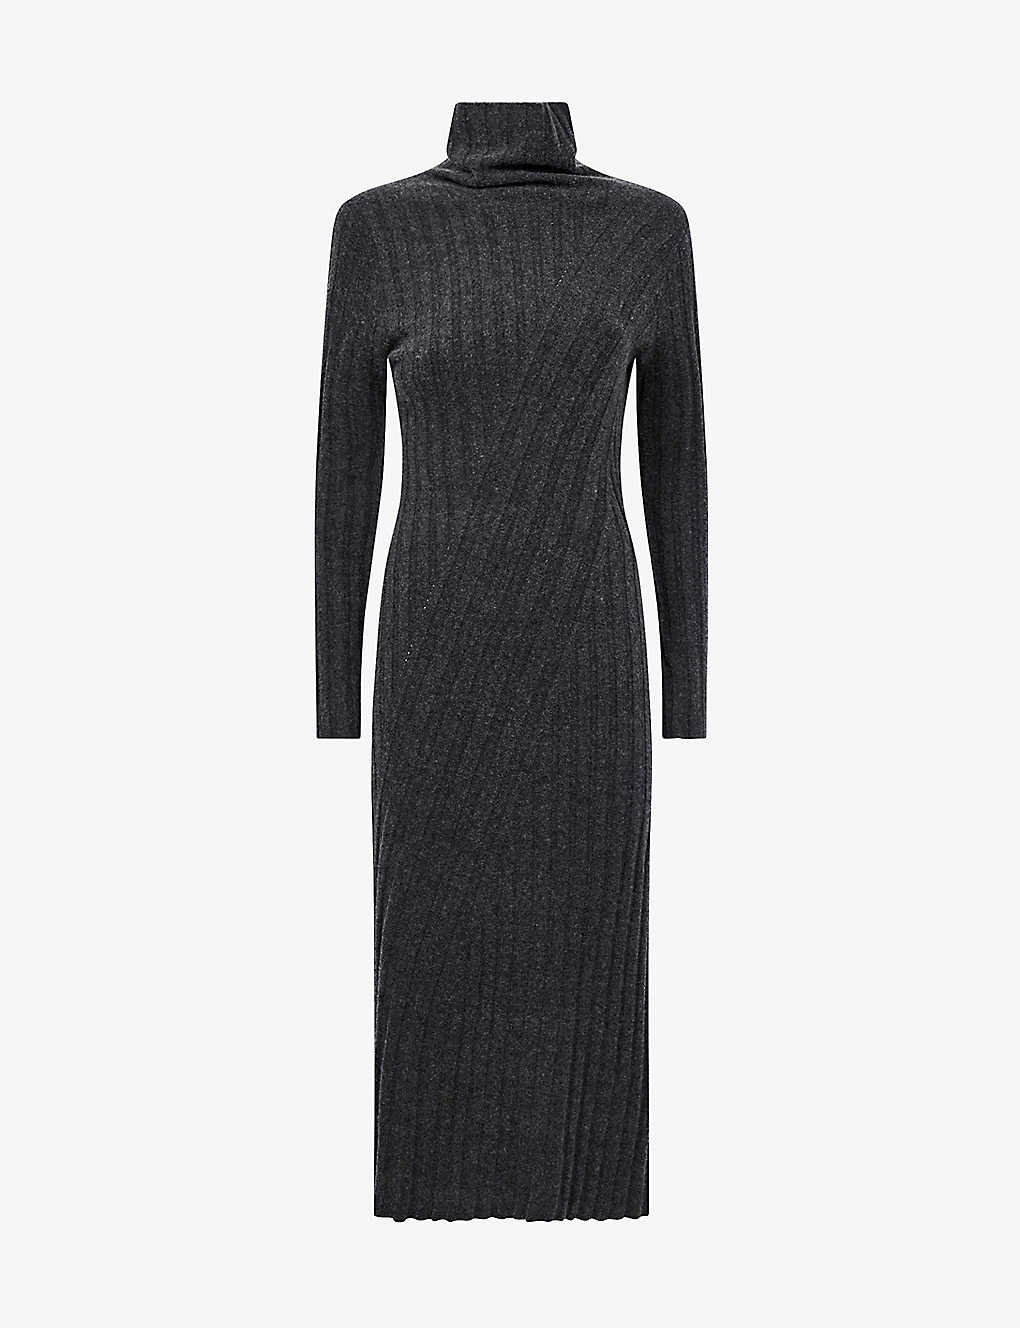 Reiss Womens Charcoal Cady Roll-neck Knitted Midi Dress